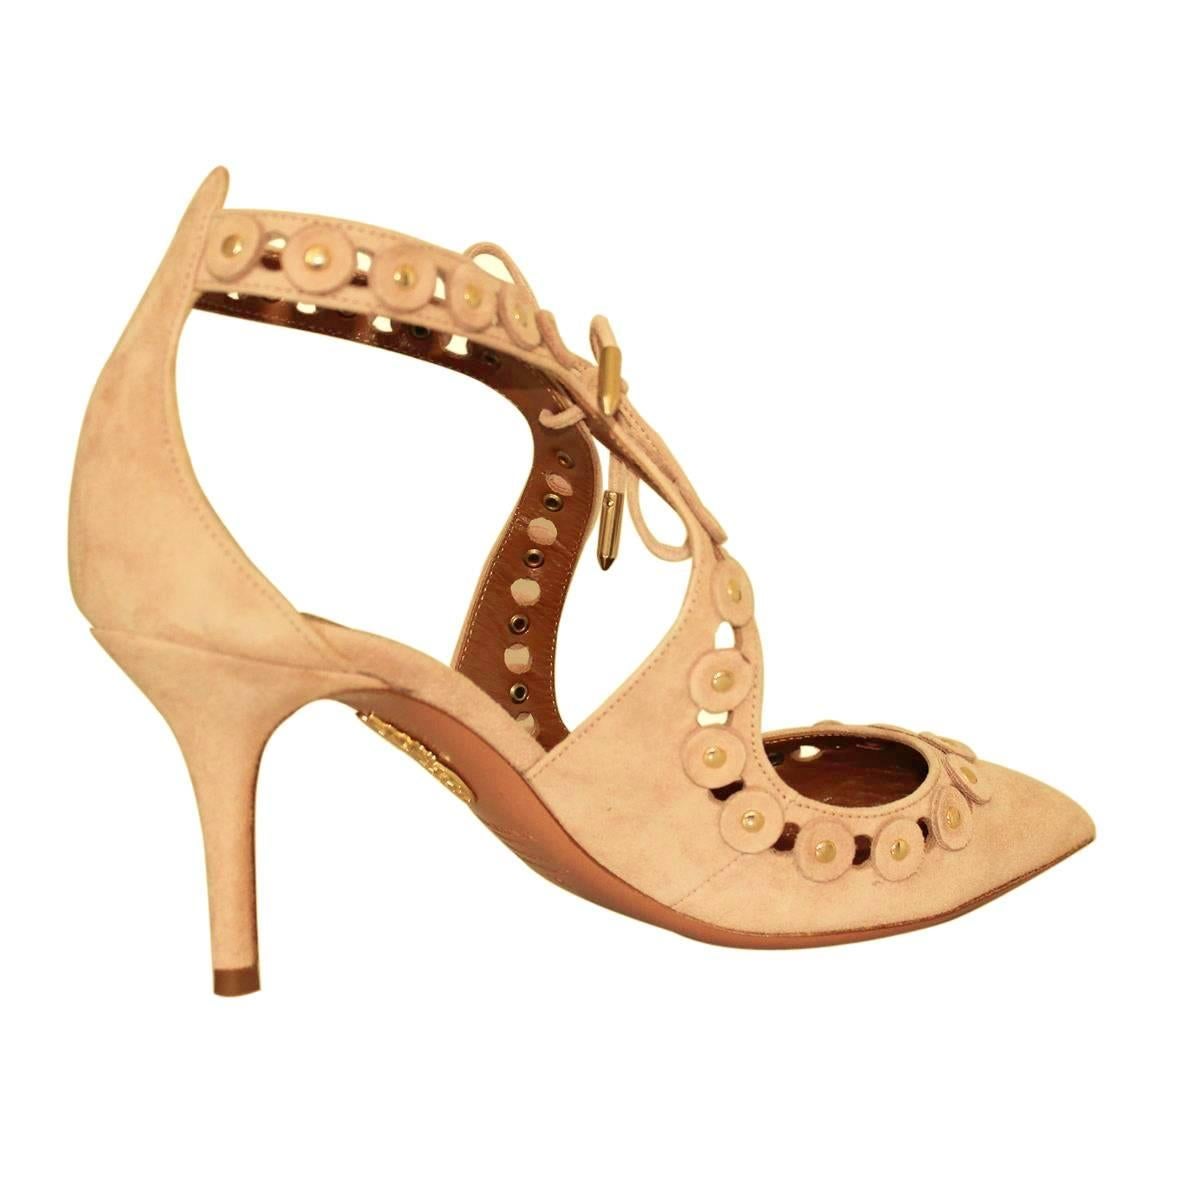 Wonderful and top quality Aquazzura pumps
Buckskin
Rose antique color
Golden inserts
With lace
Heel height cm 8 (3.15 inches)
Original price € 660
Made in Florence, Italy
Worldwide express shipping included in the price !